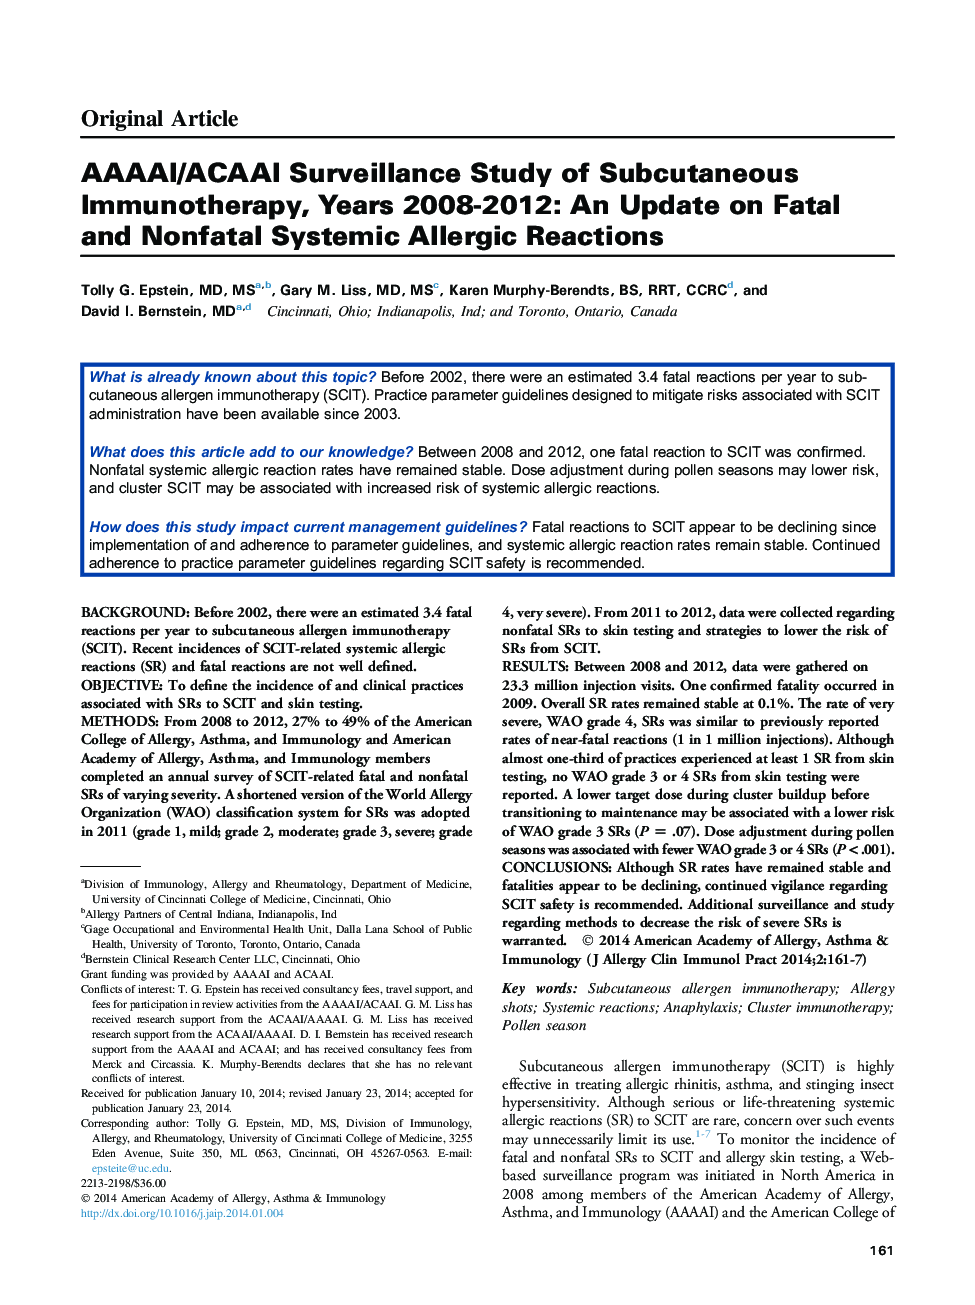 AAAAI/ACAAI Surveillance Study of Subcutaneous Immunotherapy, Years 2008-2012: An Update on Fatal and Nonfatal Systemic Allergic Reactions